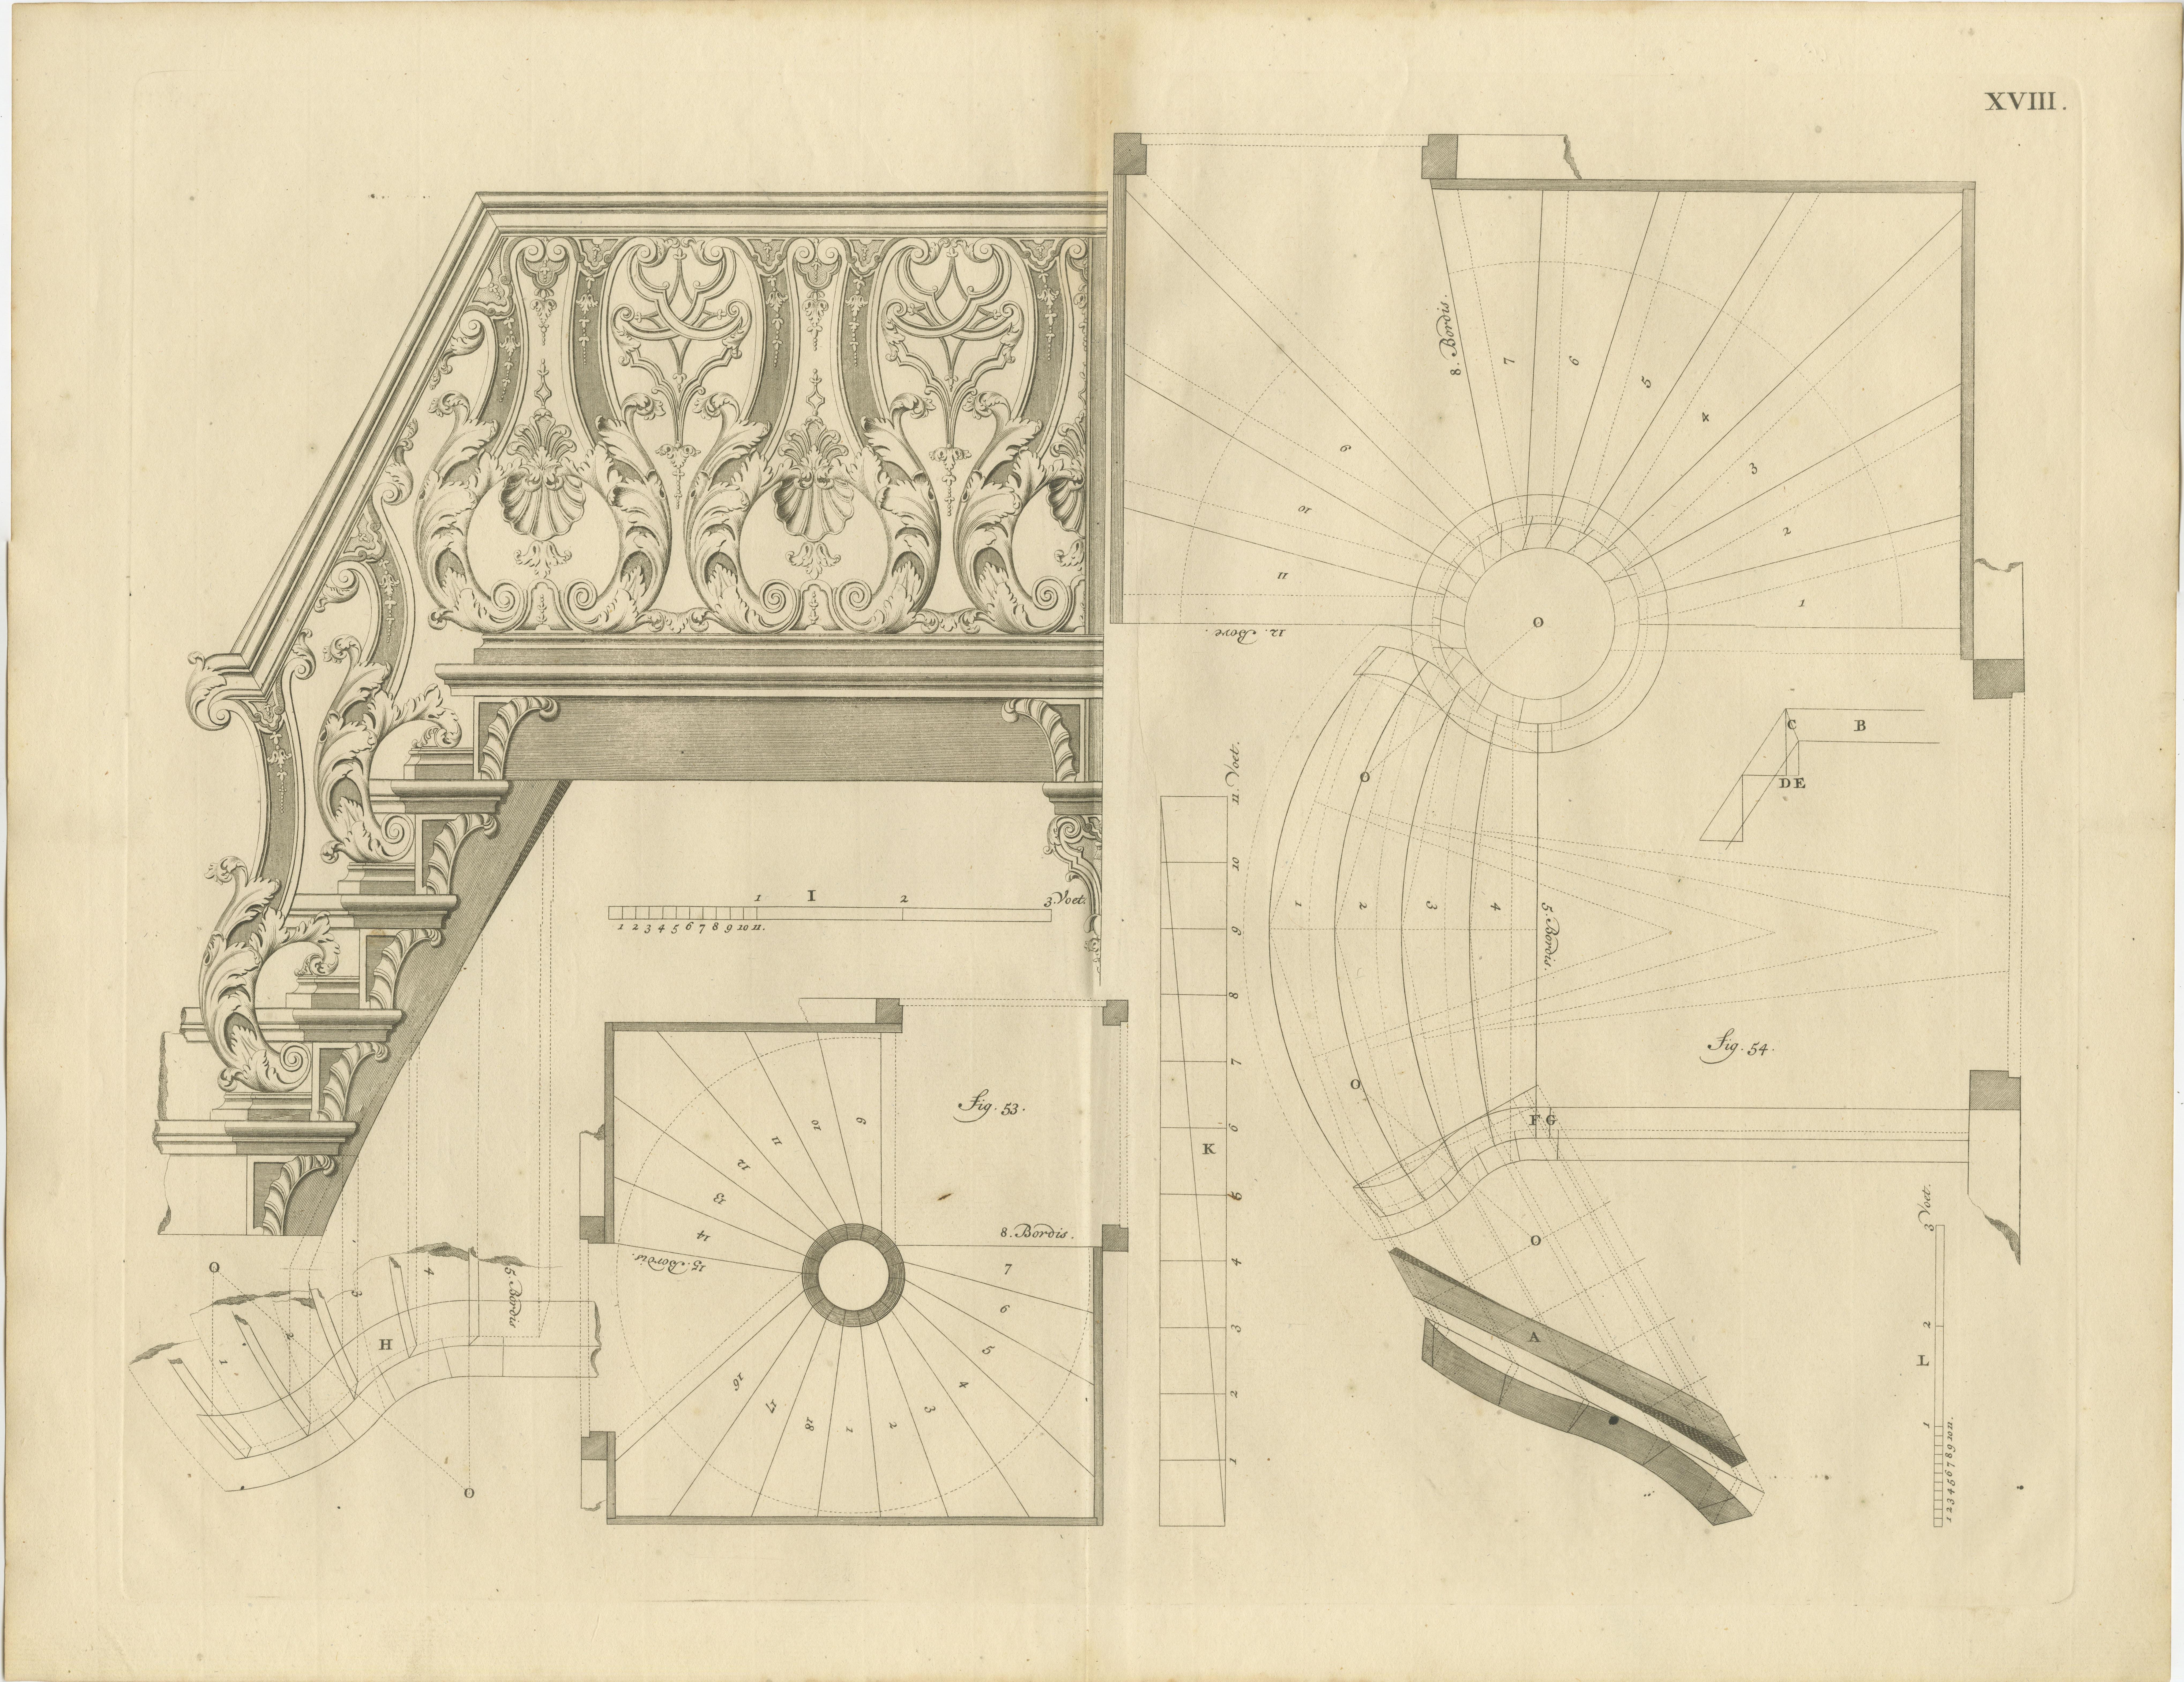 Engraved Ornate Baroque Stairs: Van der Horst's Design Mastery in Engravings, 1739 For Sale